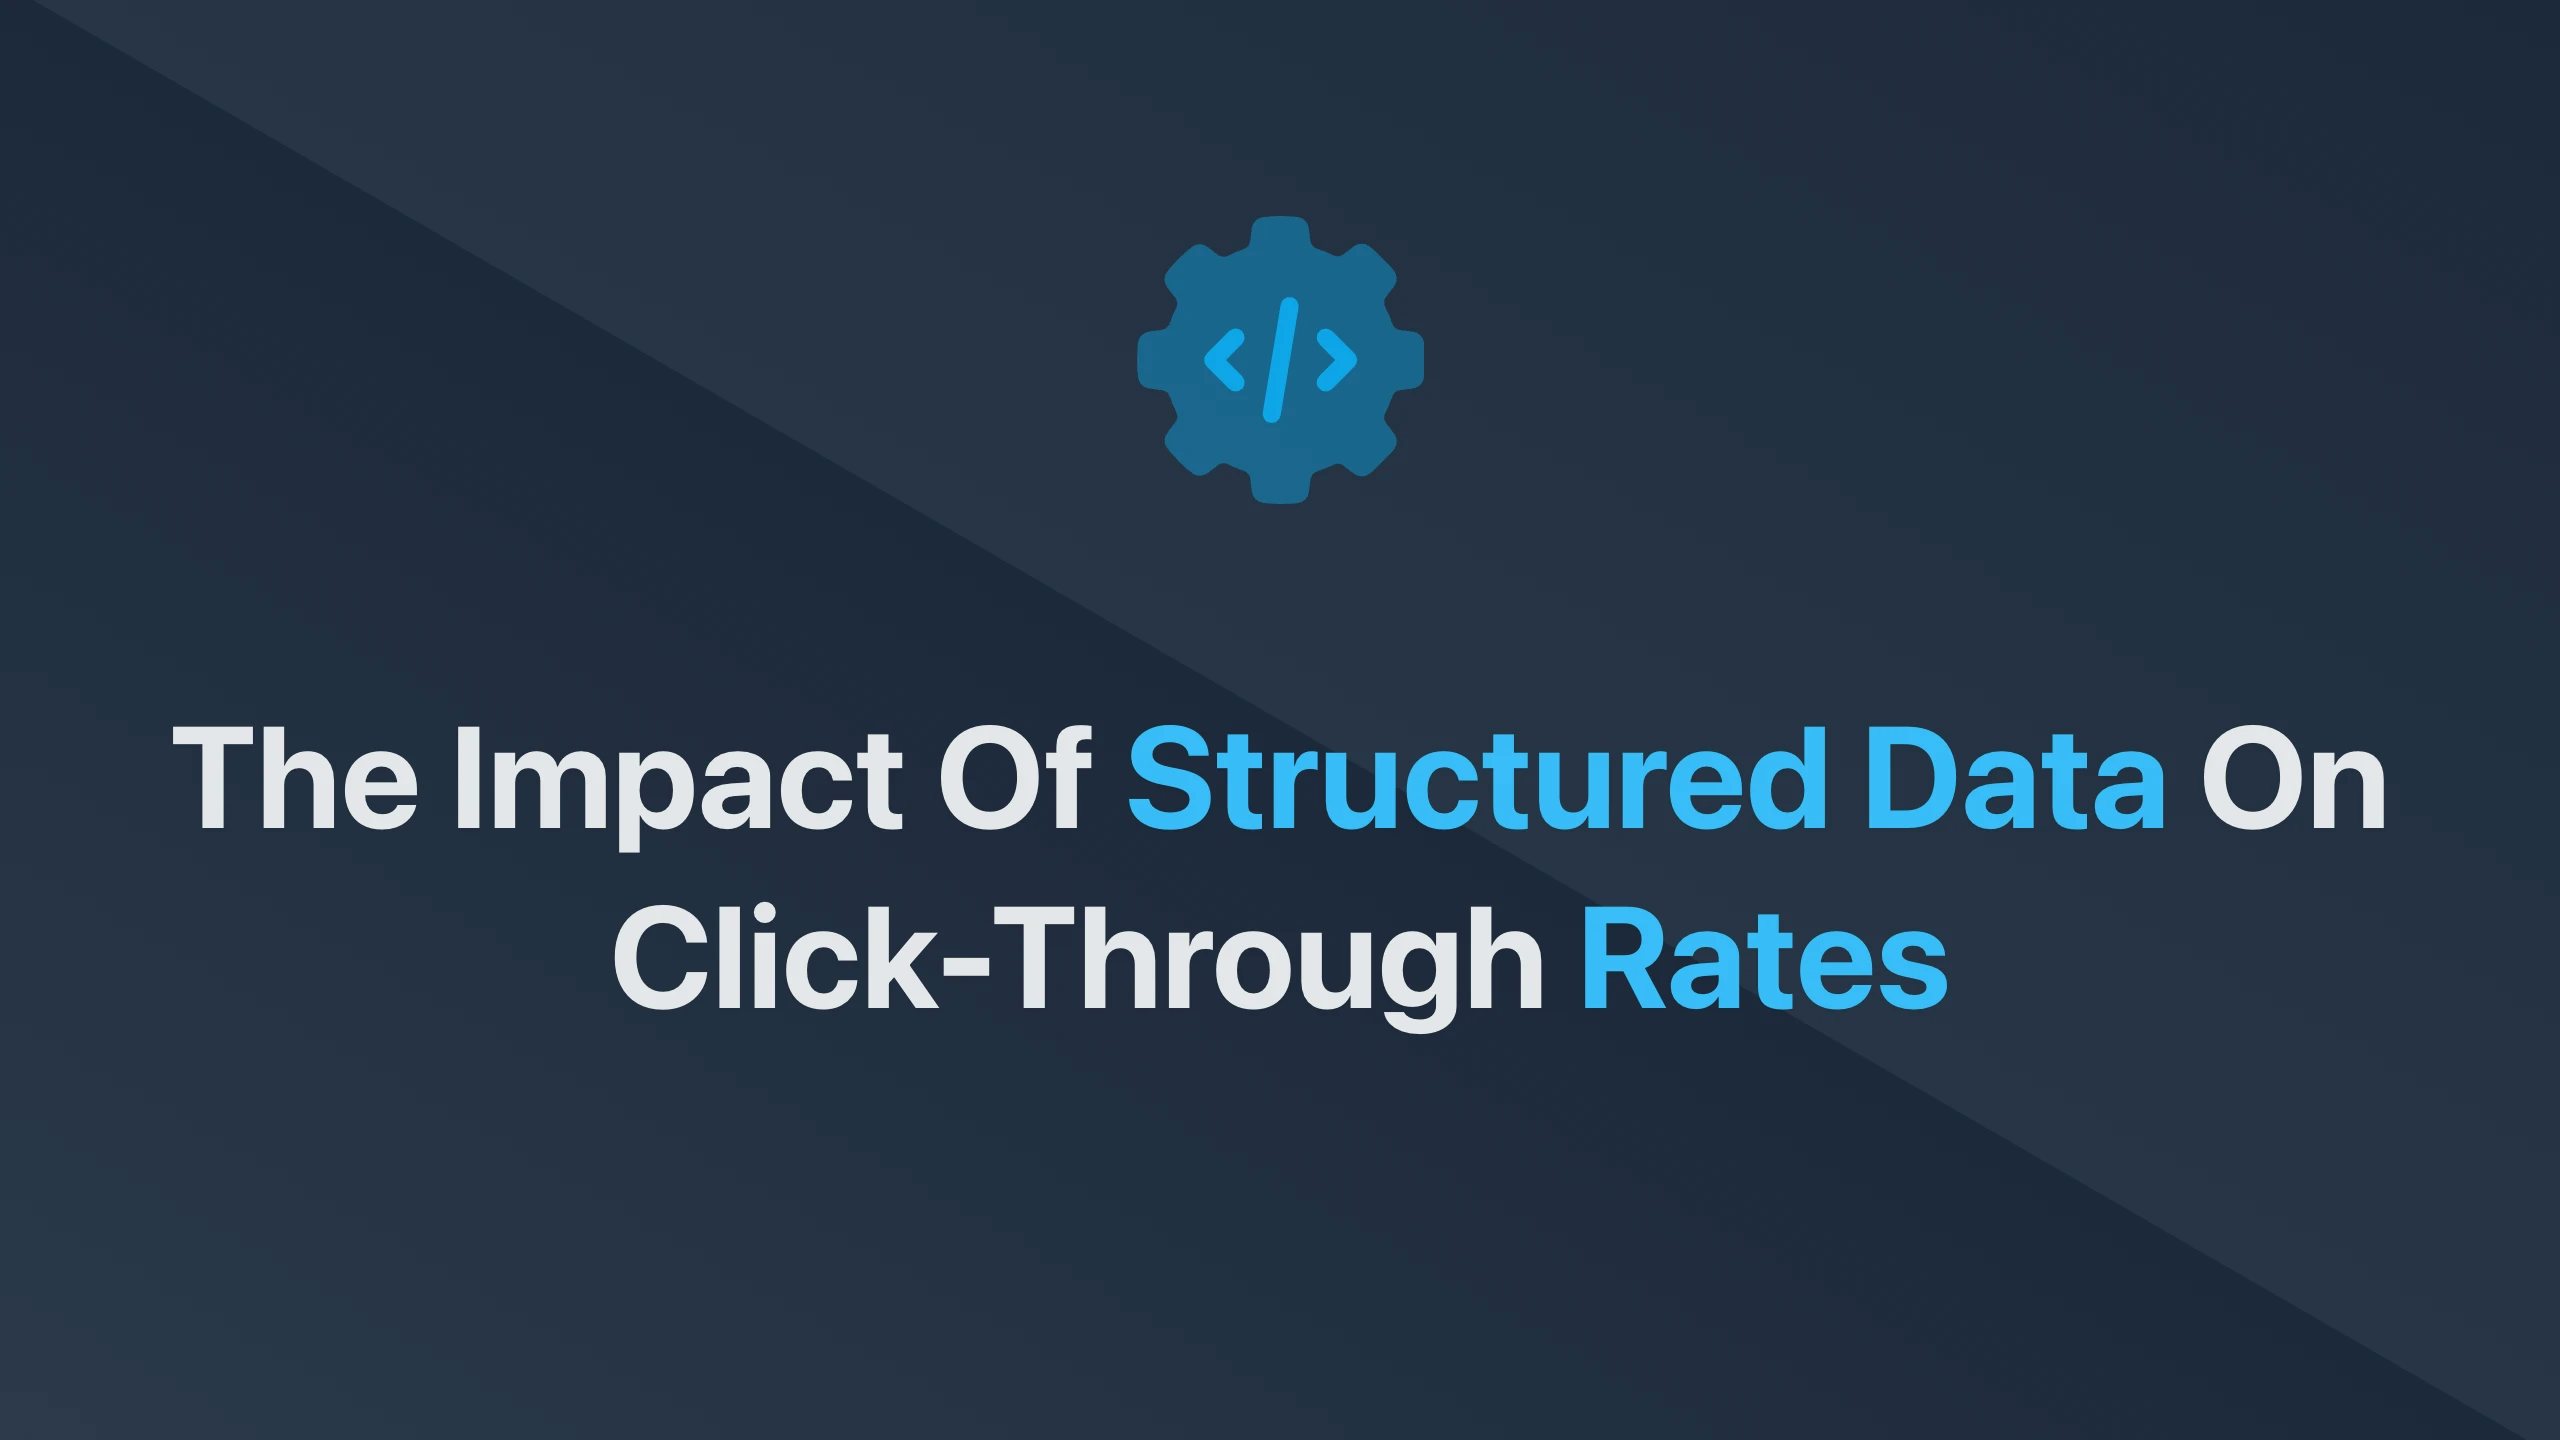 Cover Image for The Impact of Structured Data on Click-Through Rates